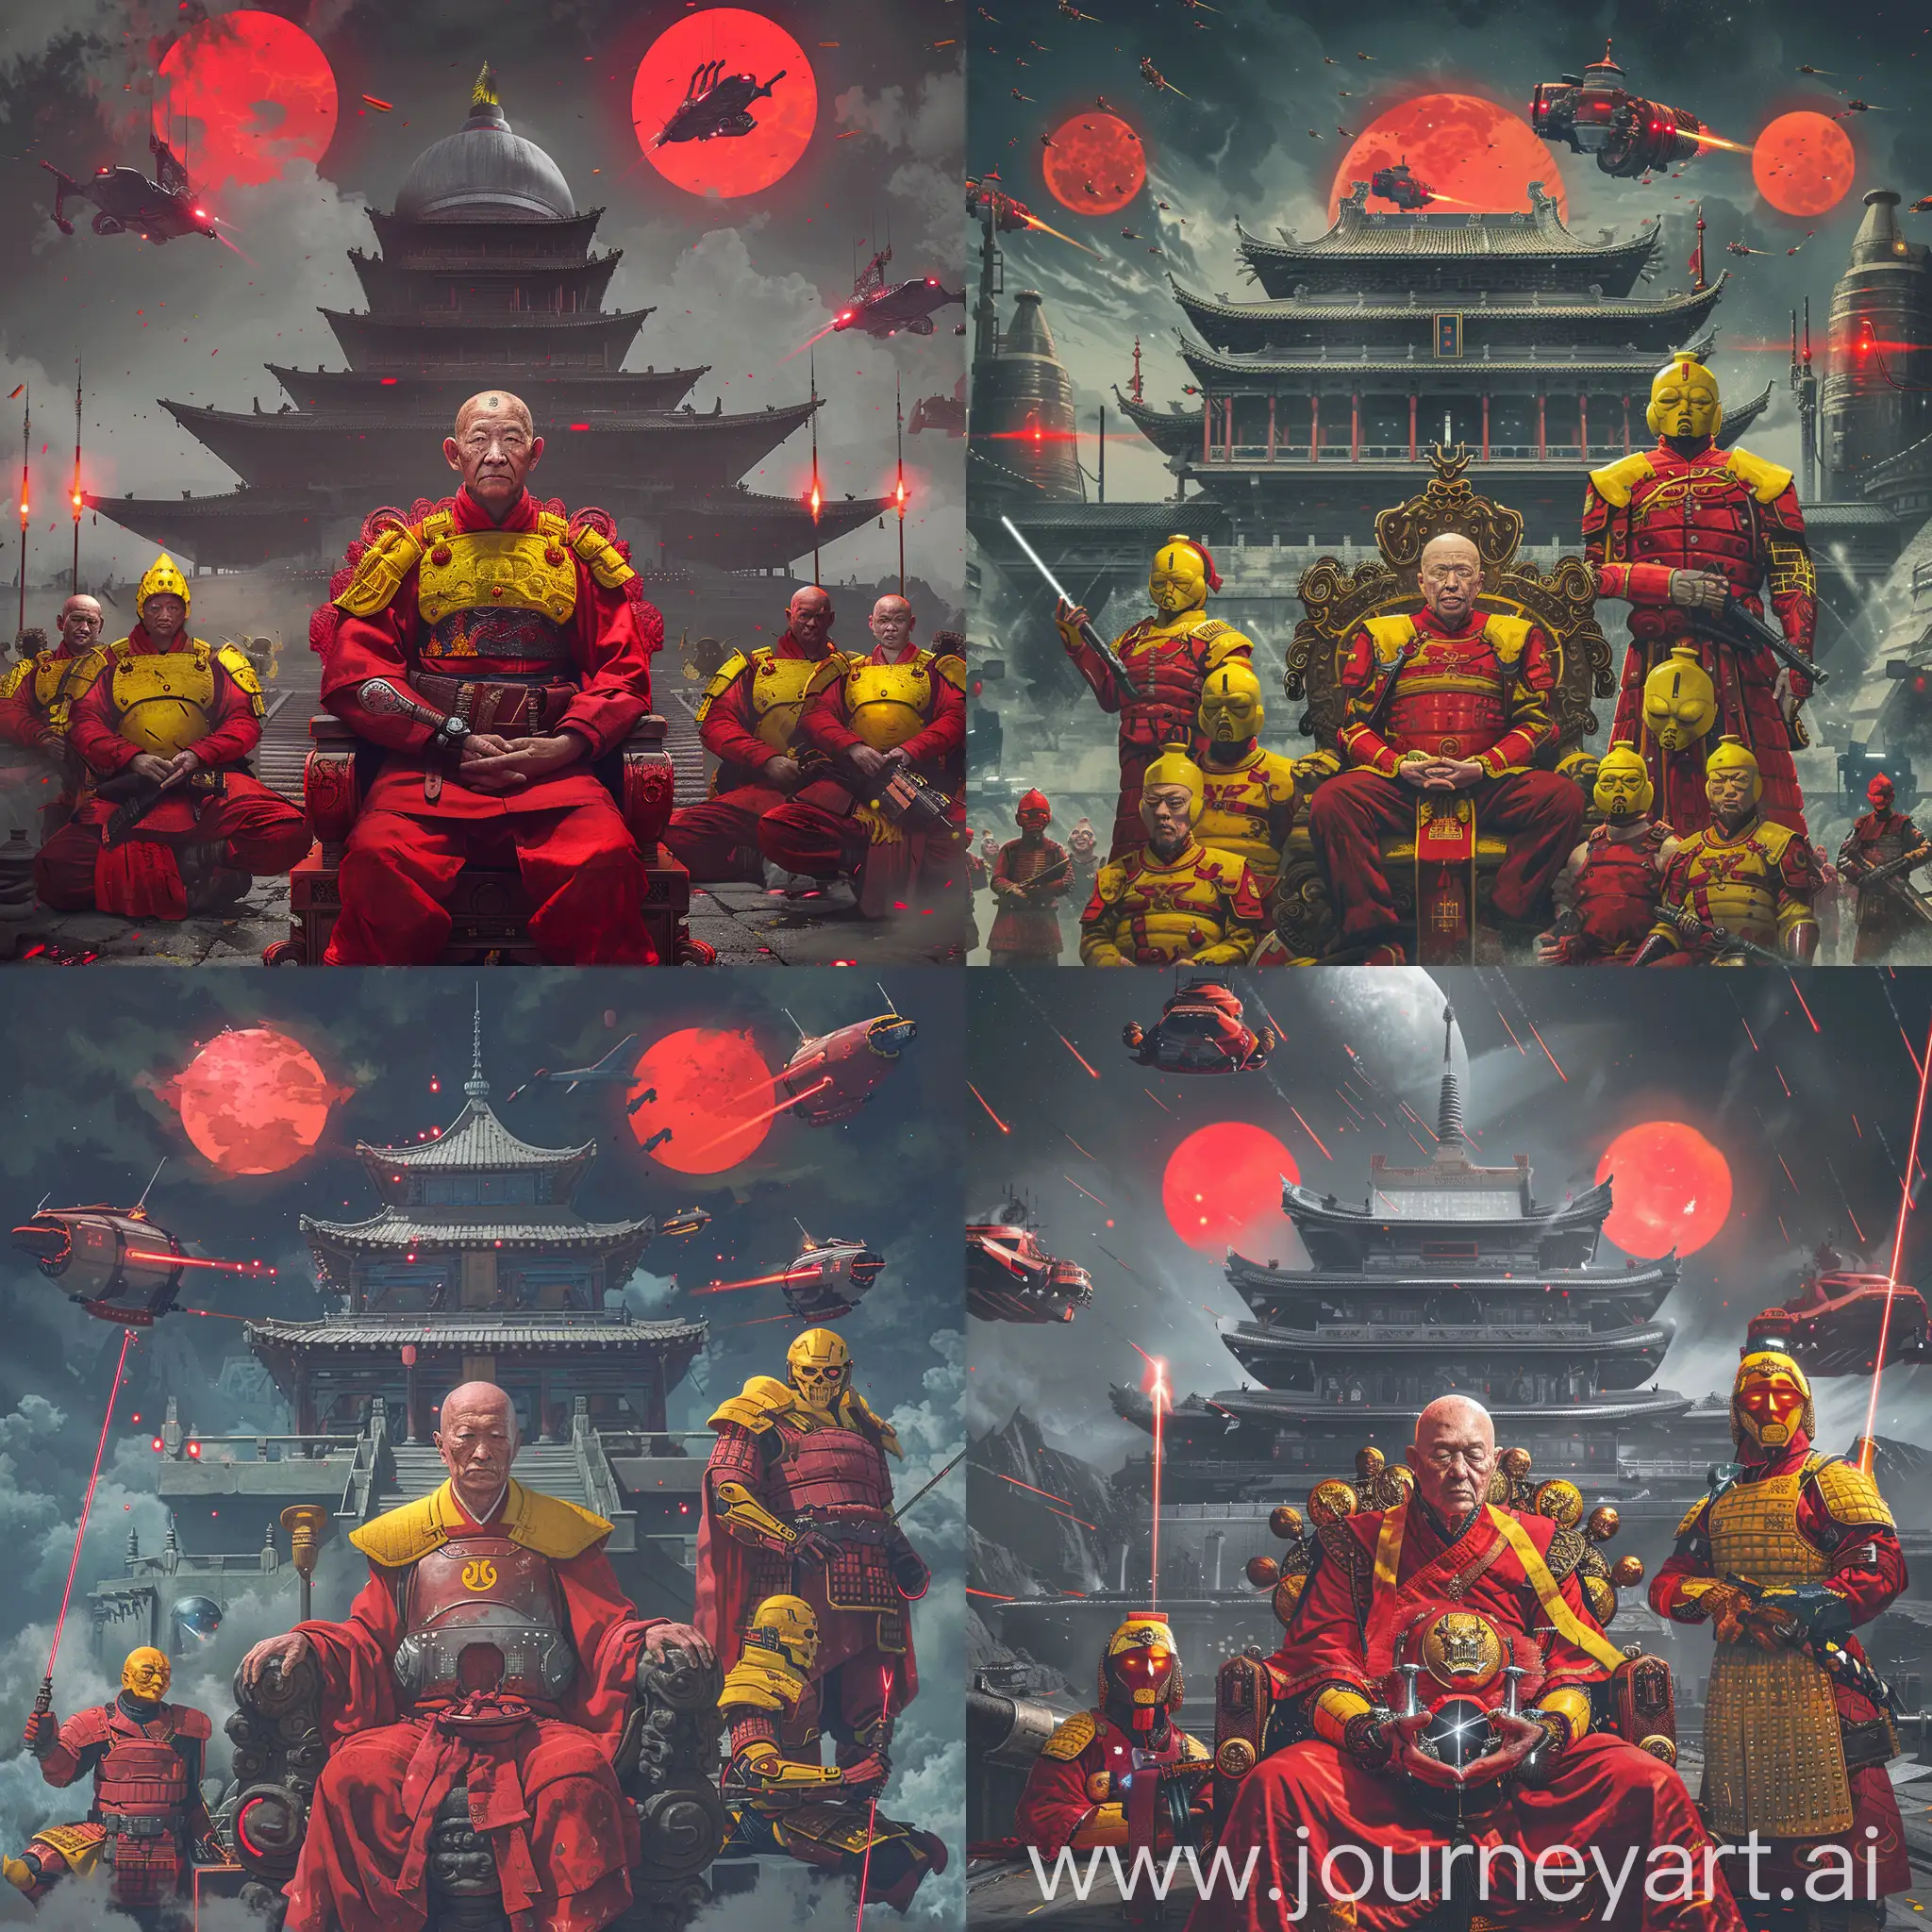 in the middle, a middle-aged Chinese Buddhist monk senior, , in red and yellow Chinese Buddhist style space marine armor, sits on his lotus royal throne,

medieval Chinese Buddhist  cyborgs monk soldiers in yellow red armor are next to the senior, they hold laser spears,

a futuristic steel gray Chinese Buddhist temple is in the background,

three red suns in the dark sky, with Chinese Buddhist style Spaceships in the sky,